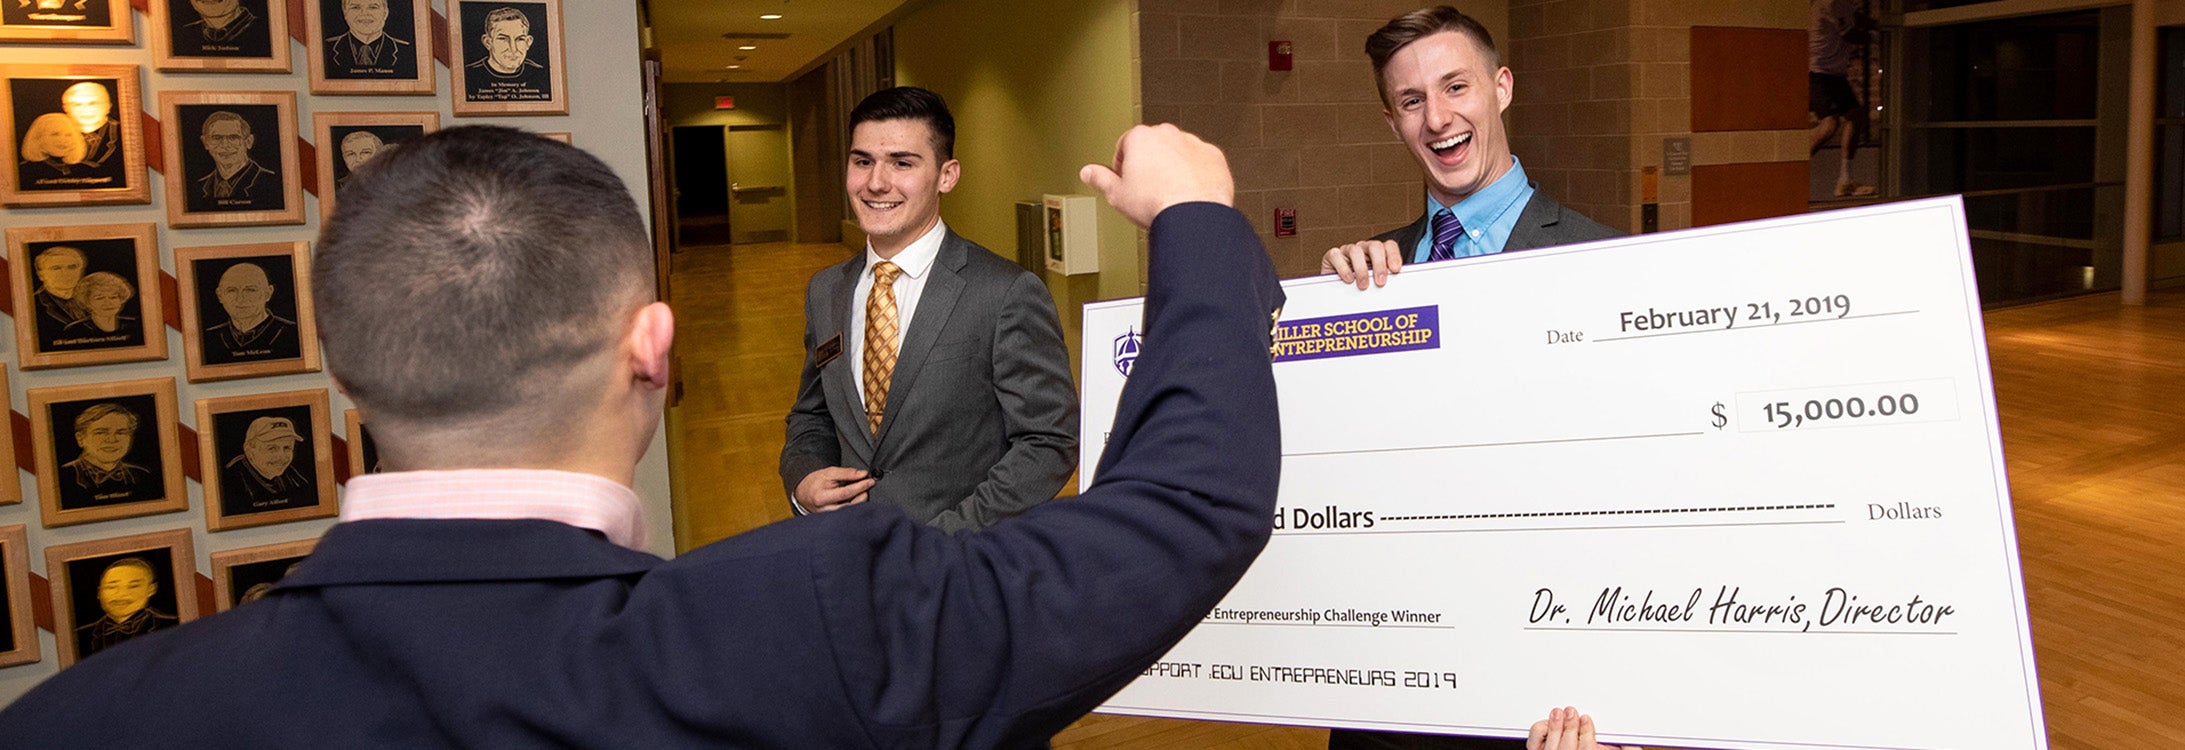 Student entrepreneurs celebrate winning pitch competition